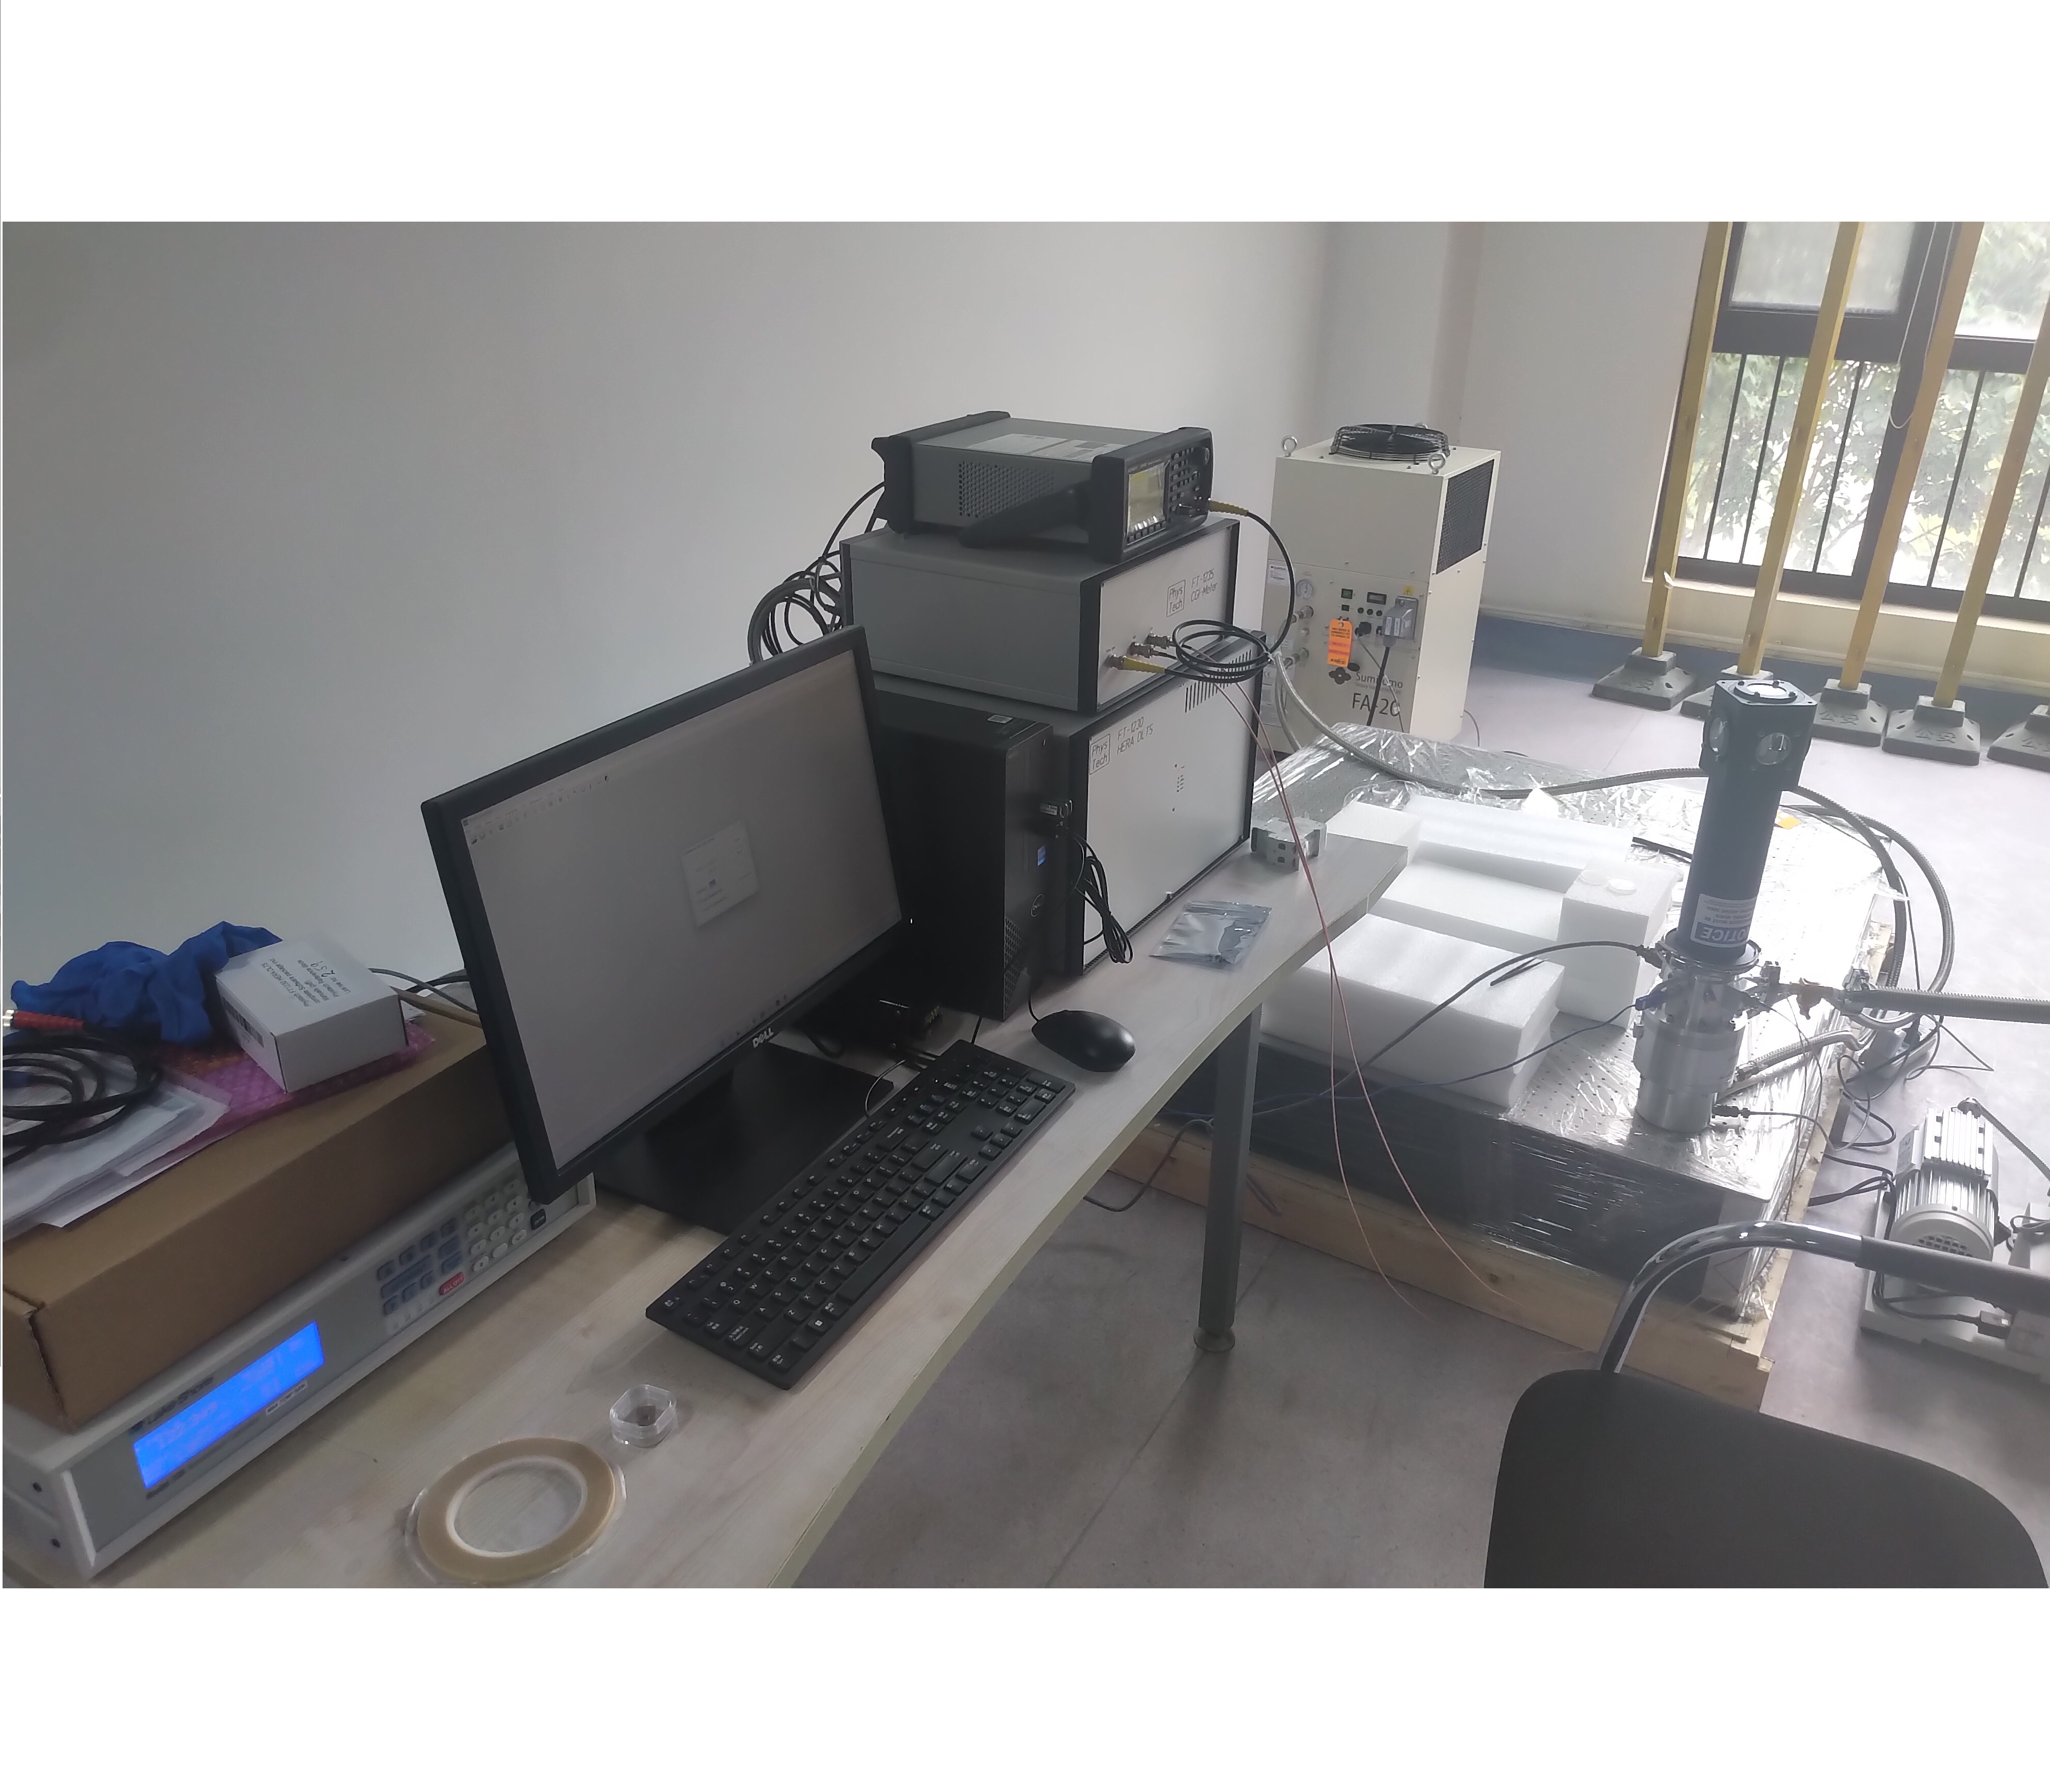 Installation and commissioning of CCS400204 closed-cycle cryostat for a university in Xi'an